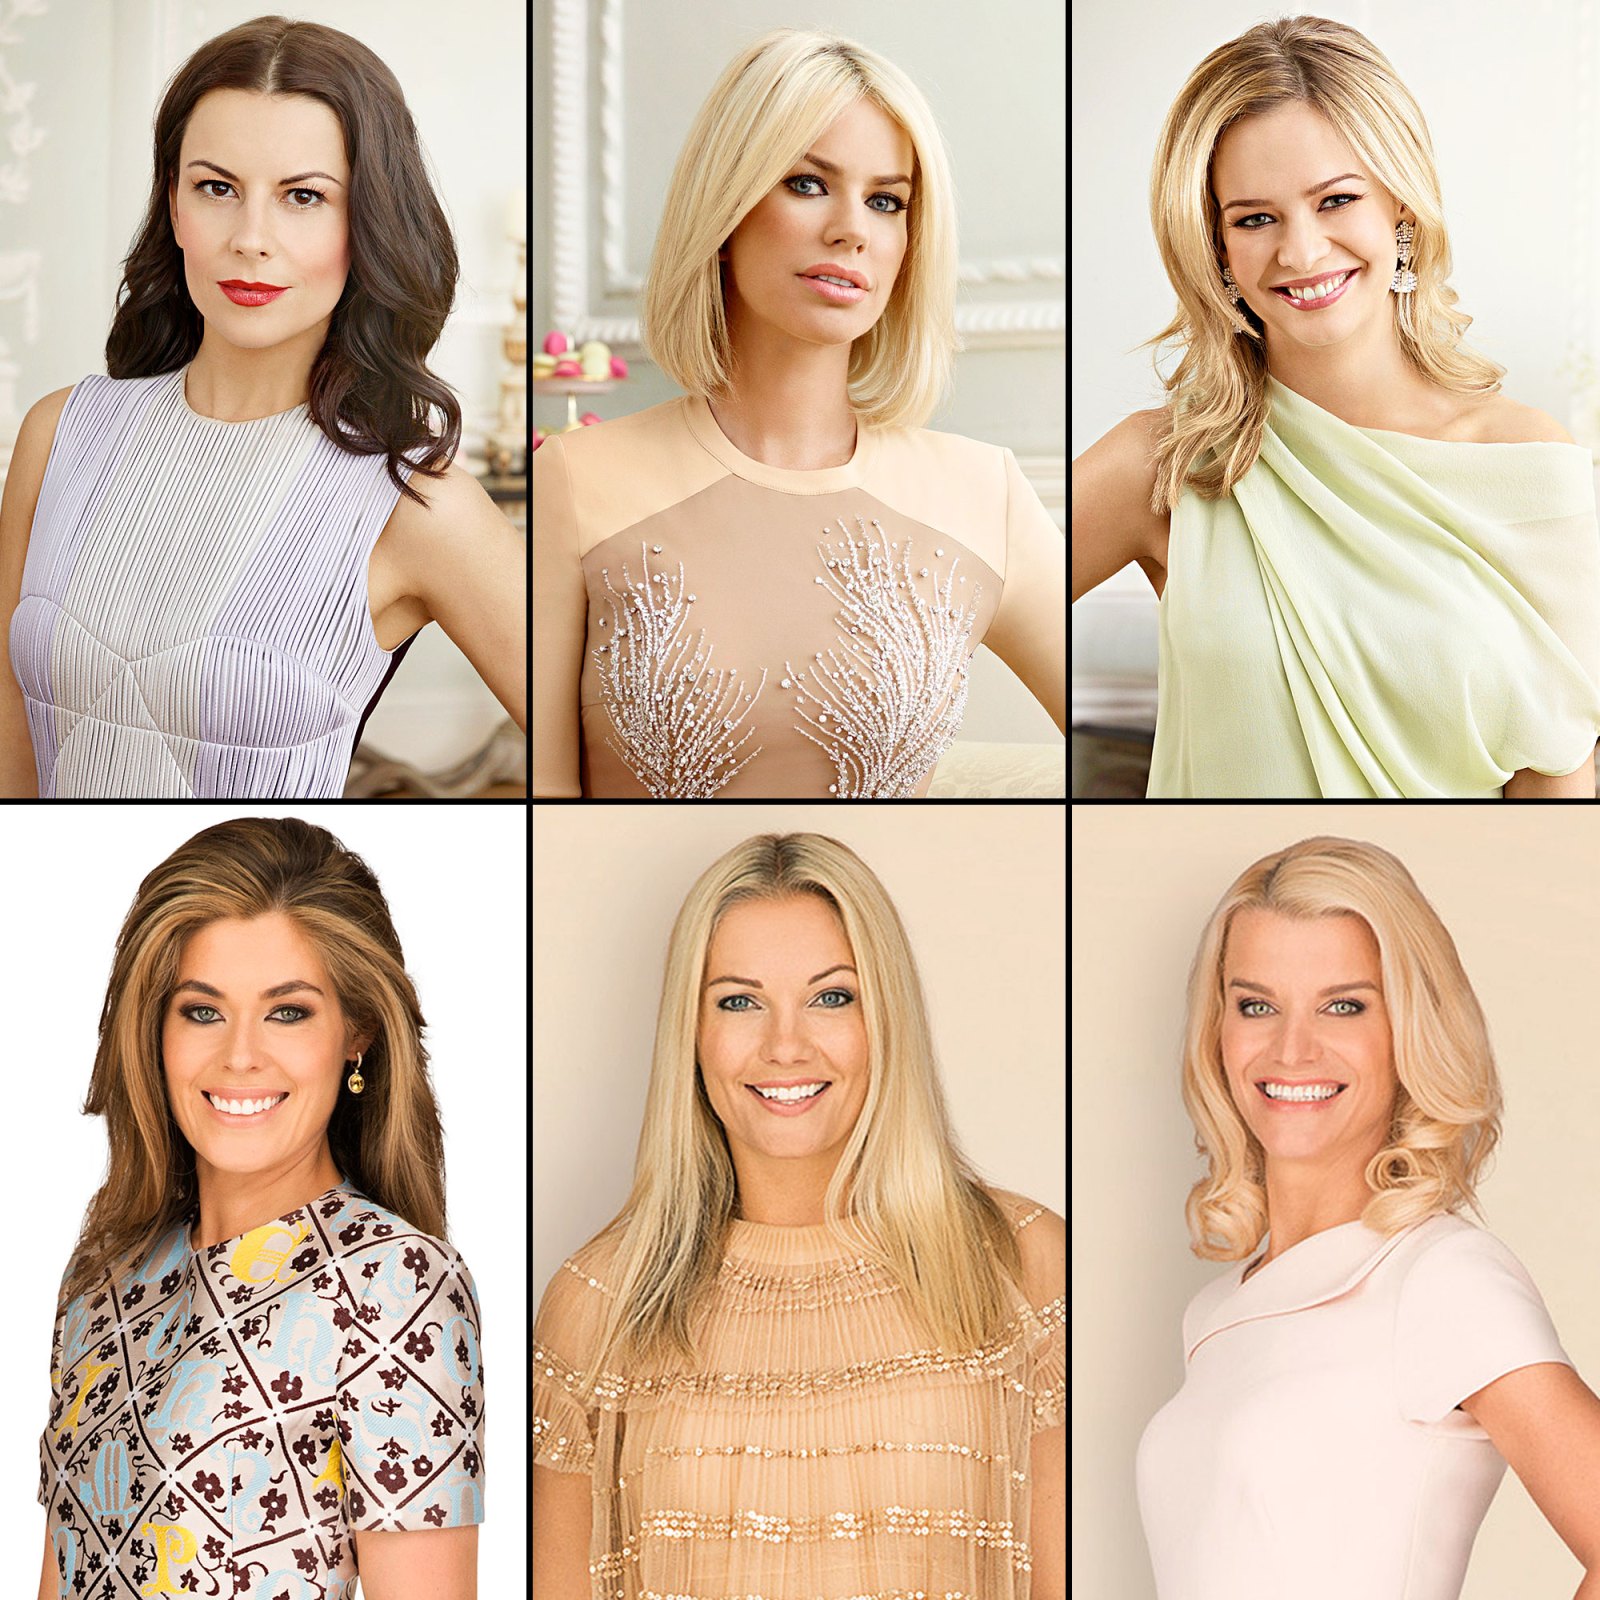 Ladies of London Stars Where Are They Now